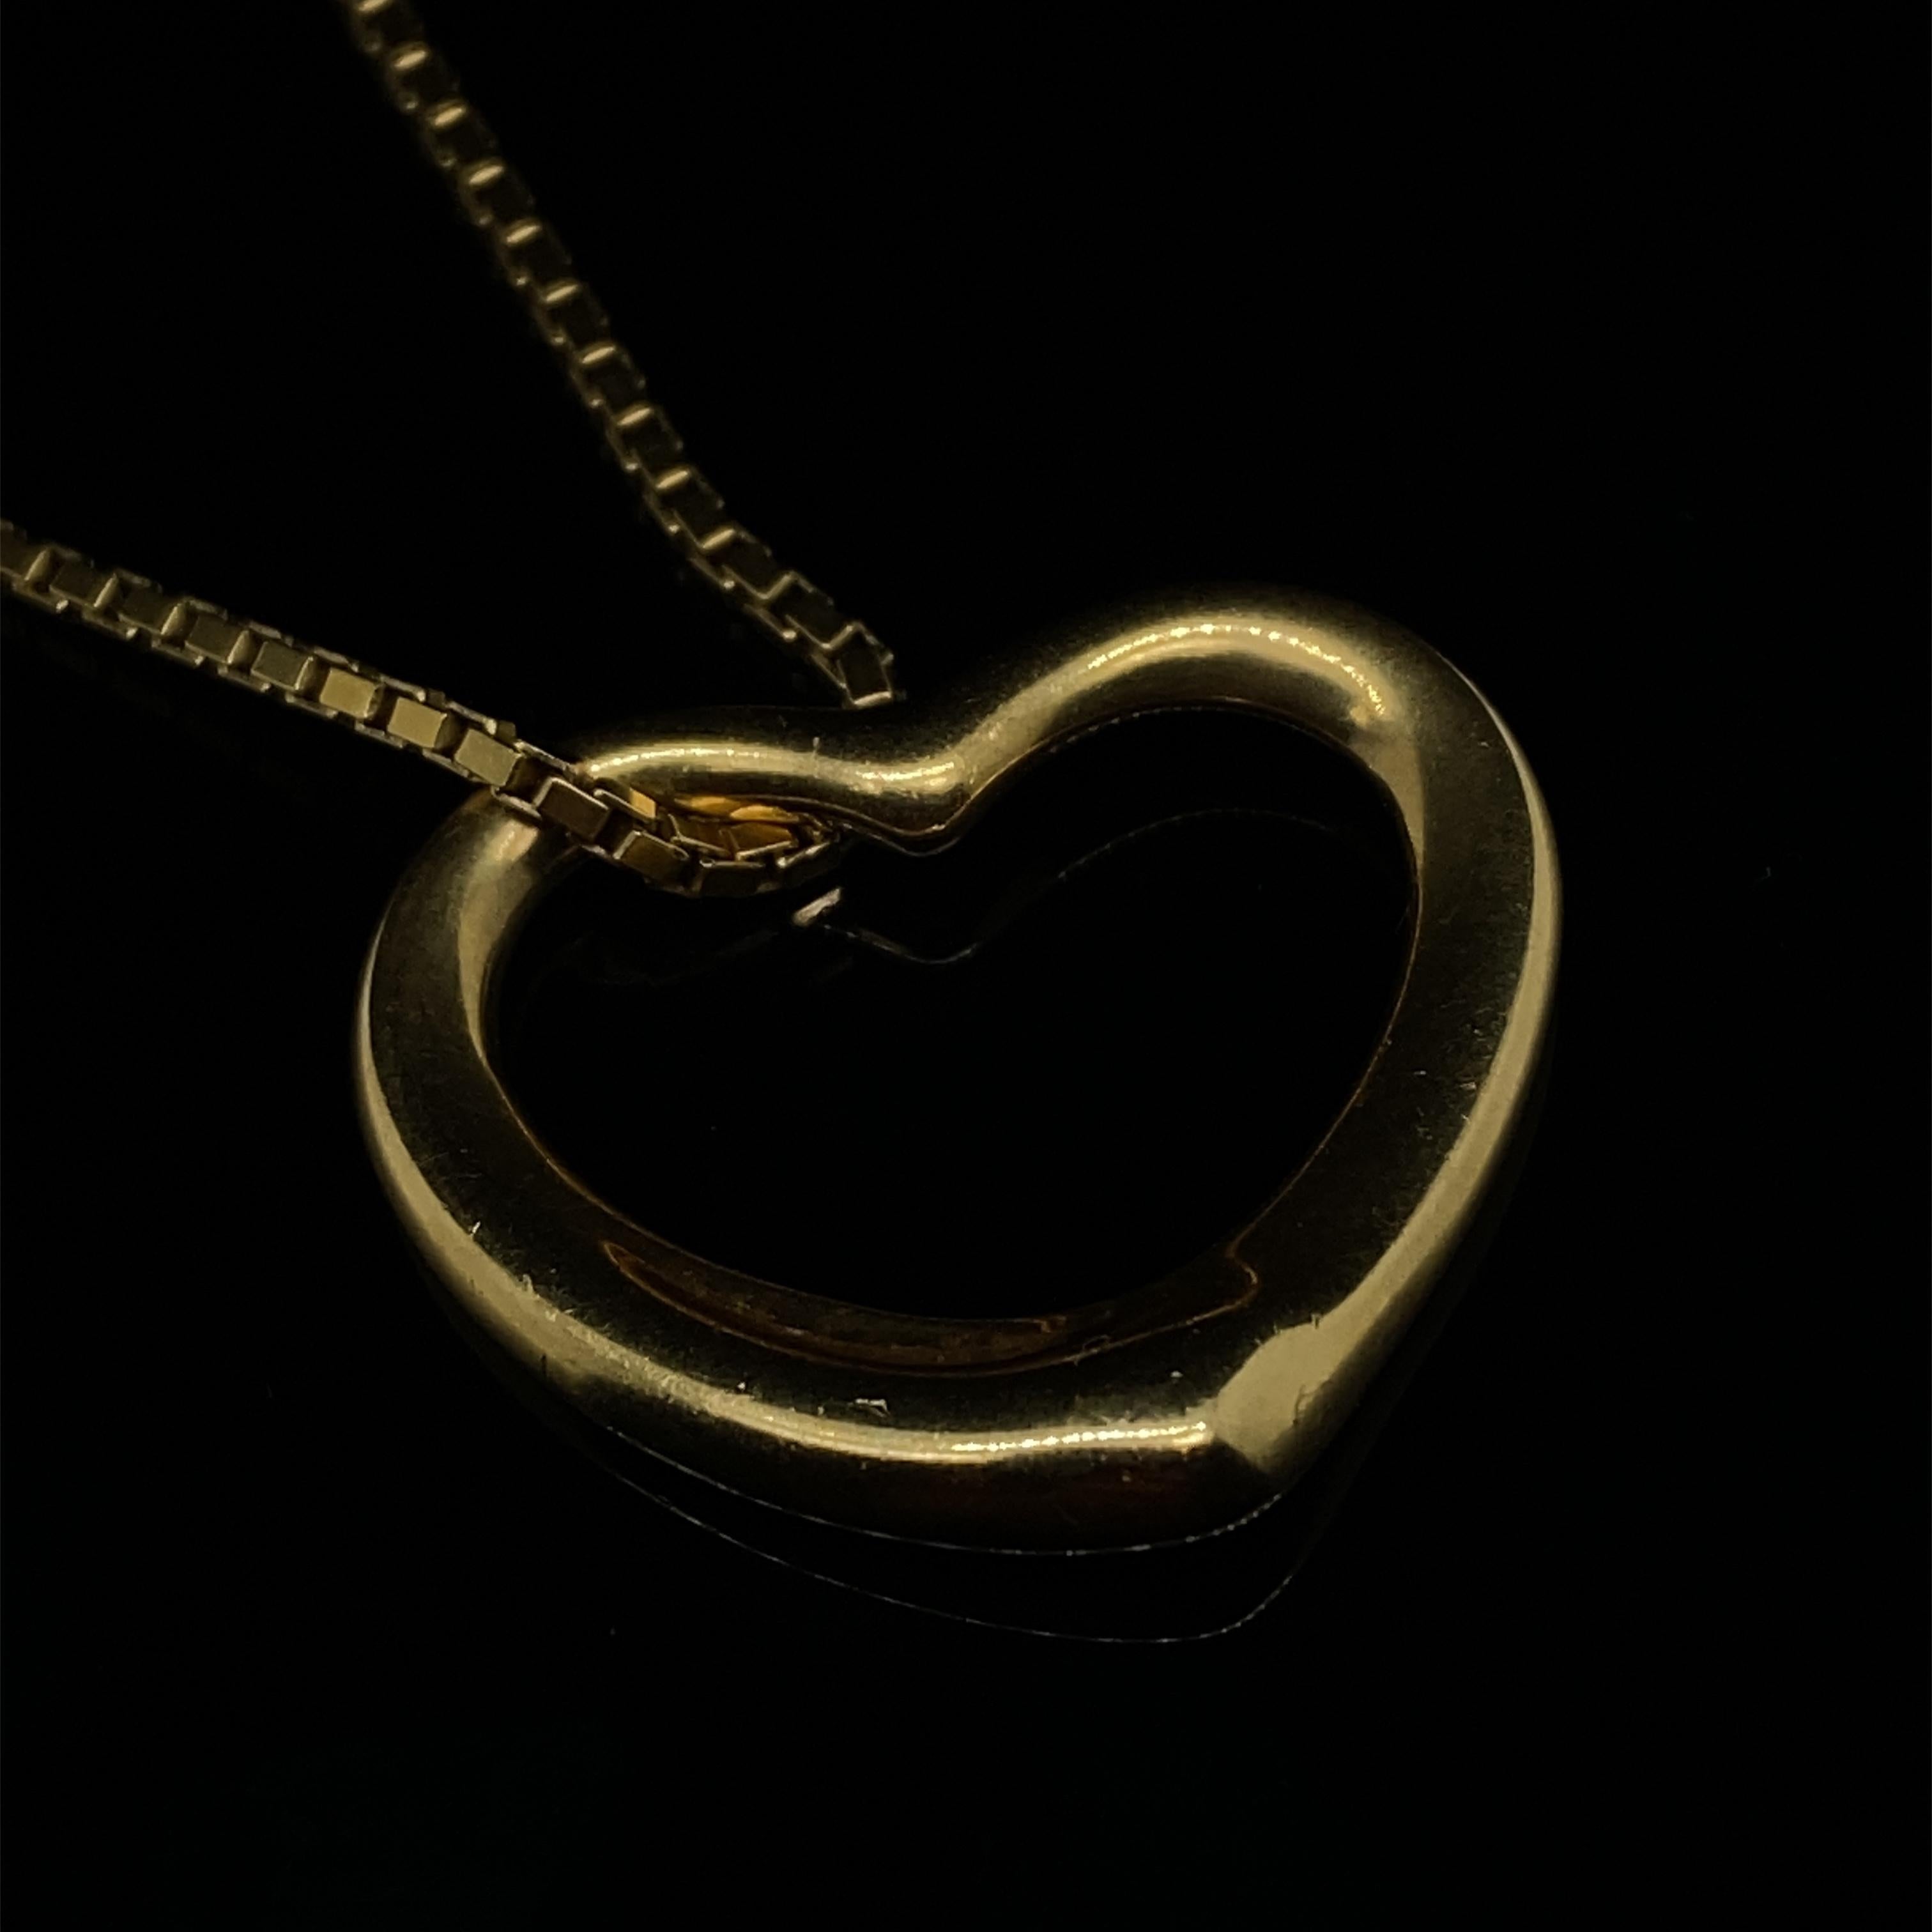 A Tiffany & Co. Elsa Peretti open heart 18 karat yellow gold pendant necklace.

Comprising of an 18 karat yellow gold open heart pendant, suspended on an 18 karat yellow gold fine box chain. 

The simple and elegant open heart is one of Elsa